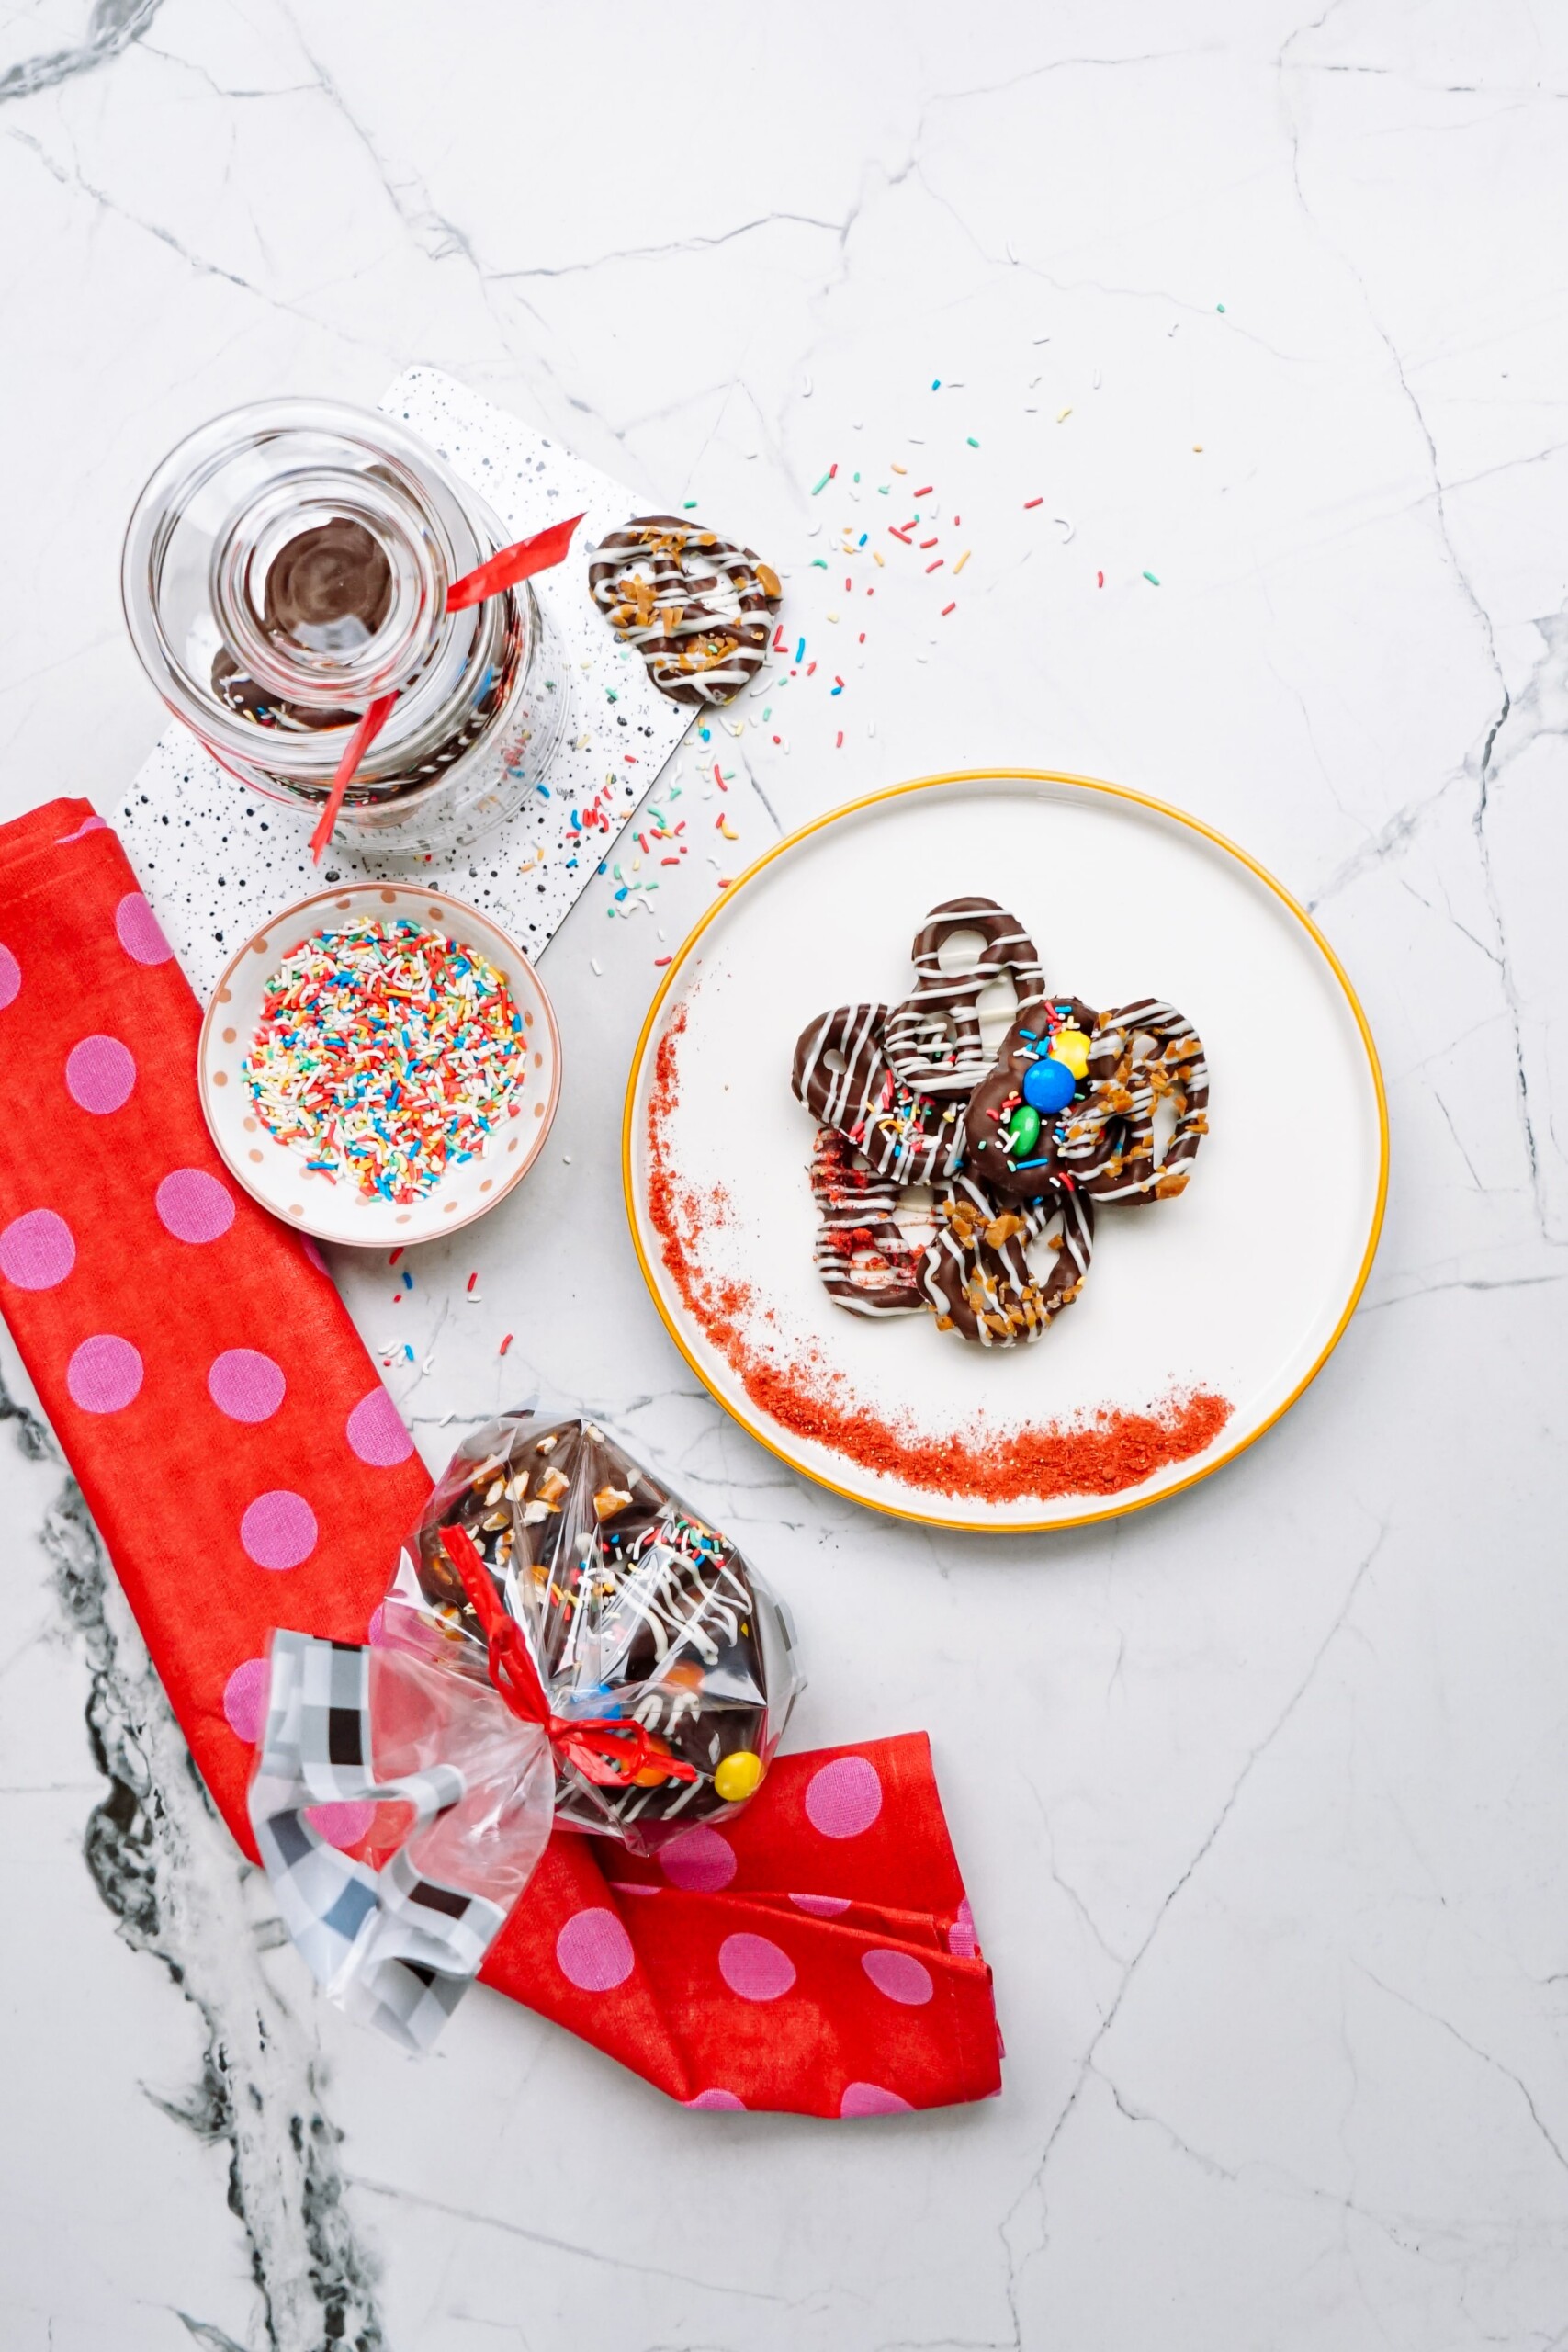 A plate with chocolate pretzels and sprinkles on it.